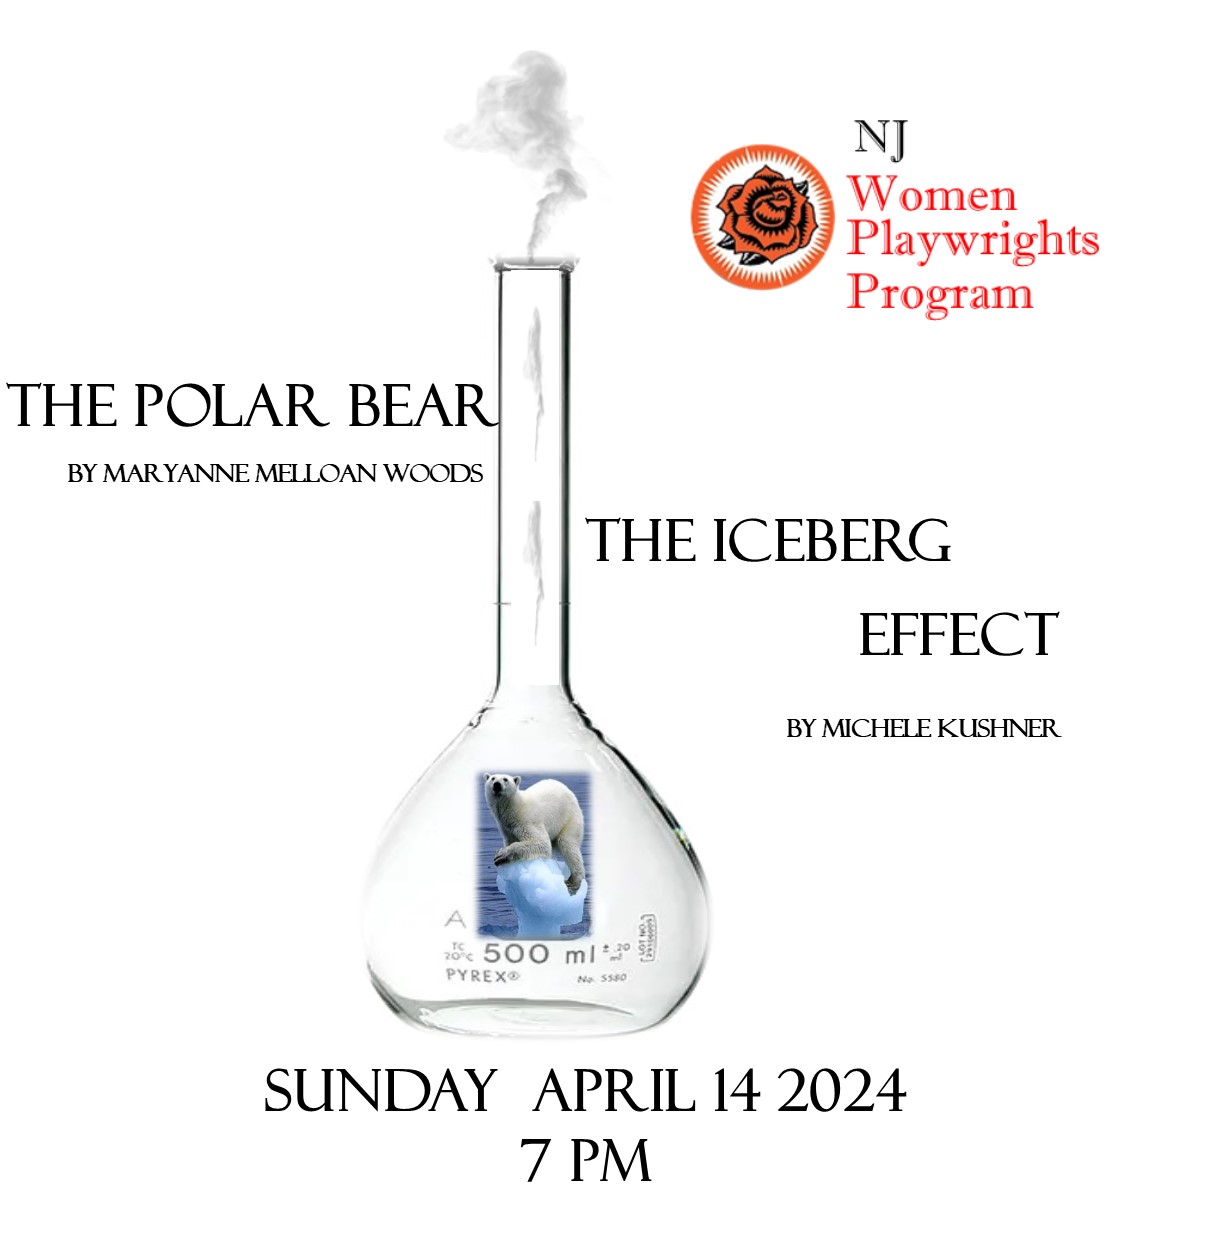 New Jersey Women Playwrights Program | The Polar Bear by Maryanne Melloan Woods// The Iceberg Effect by Michele Kushner| Sunday April 14 2024 | 7:00 pm